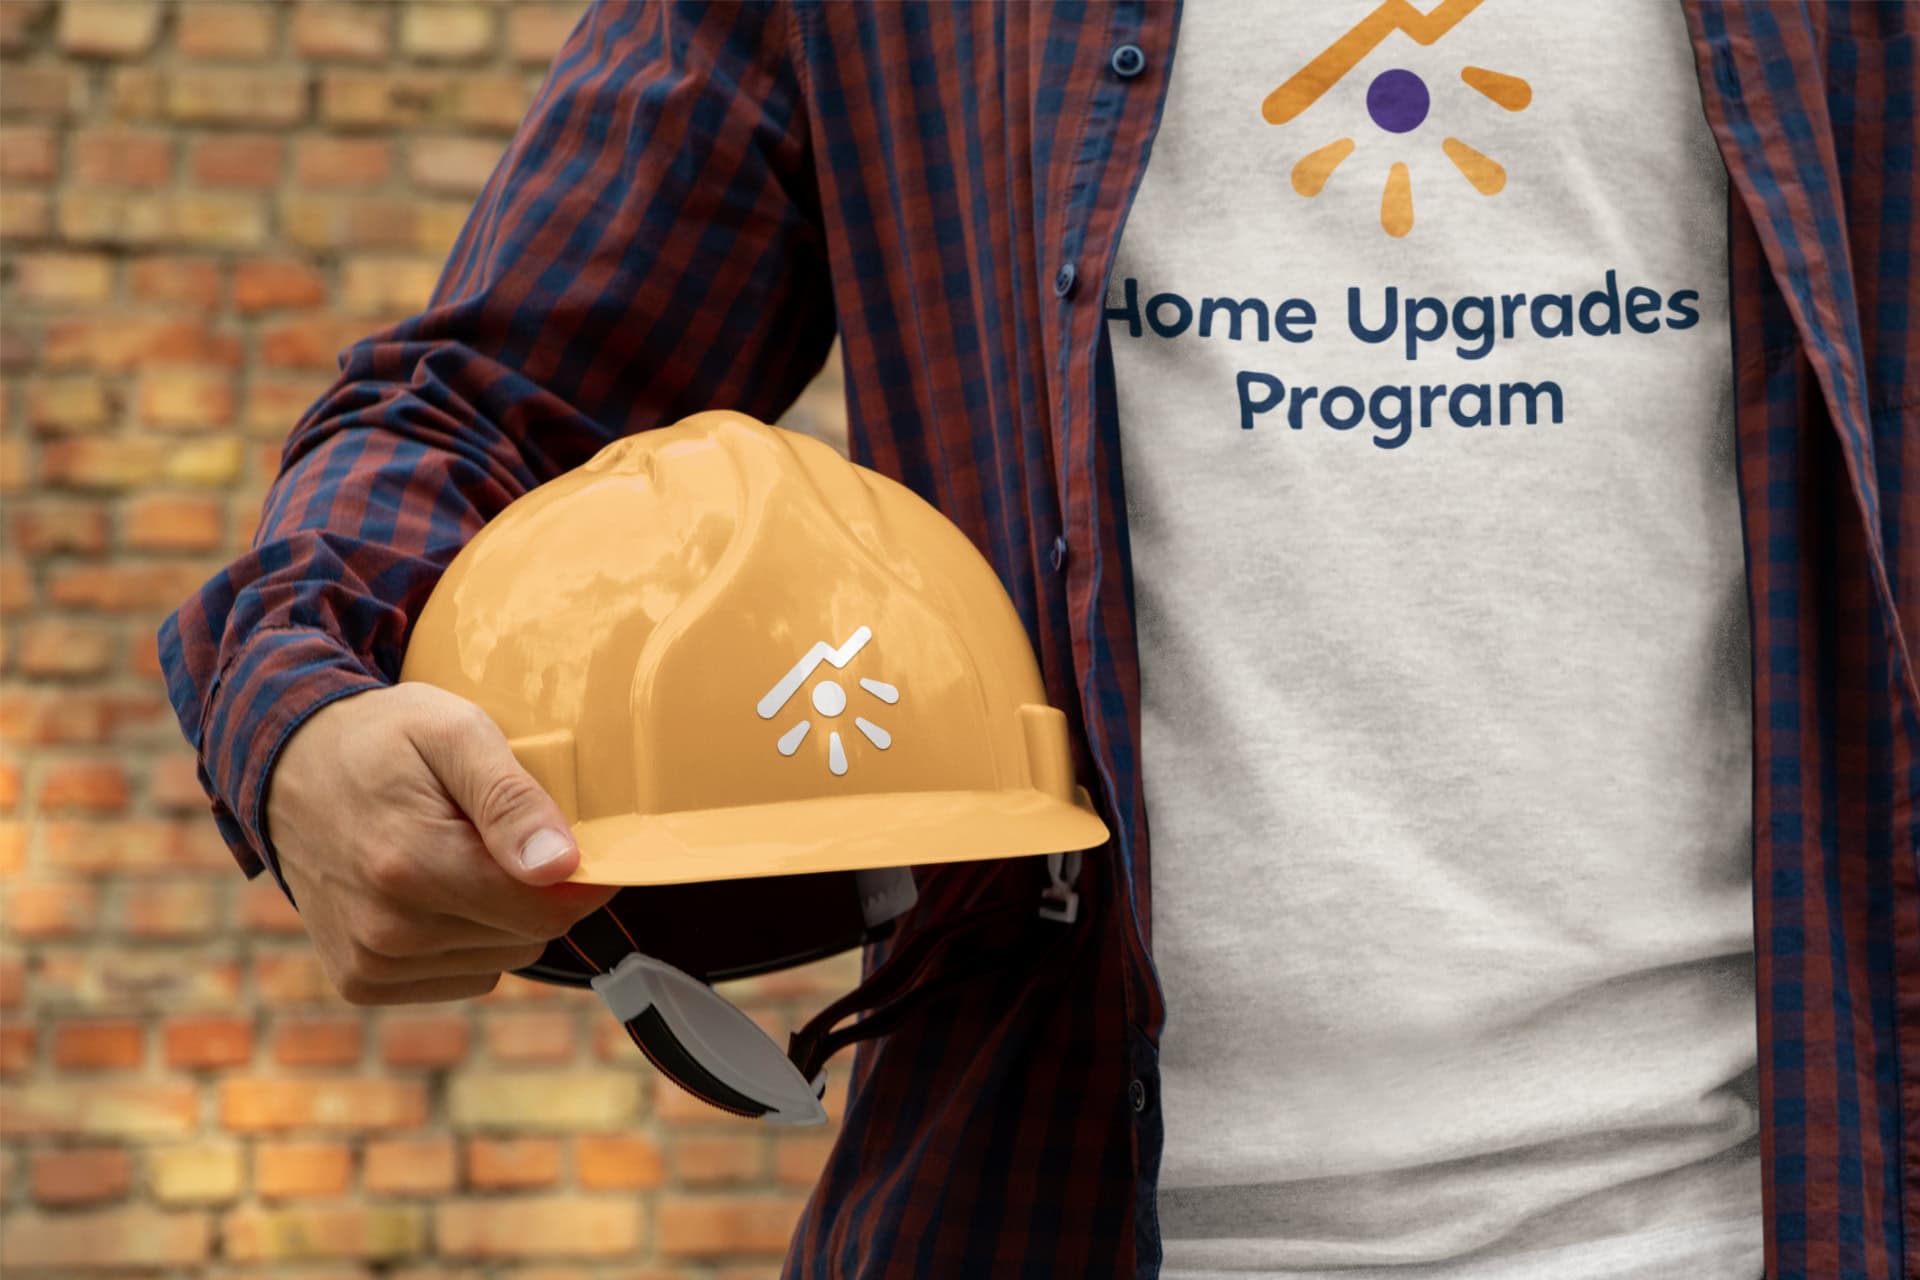 A man stands in front of a brick wall. We just see his chest and arm. Under his arm is a yellow construction hat. His shirt reads 'Home Upgrades Program' with the Kambo logo on it.